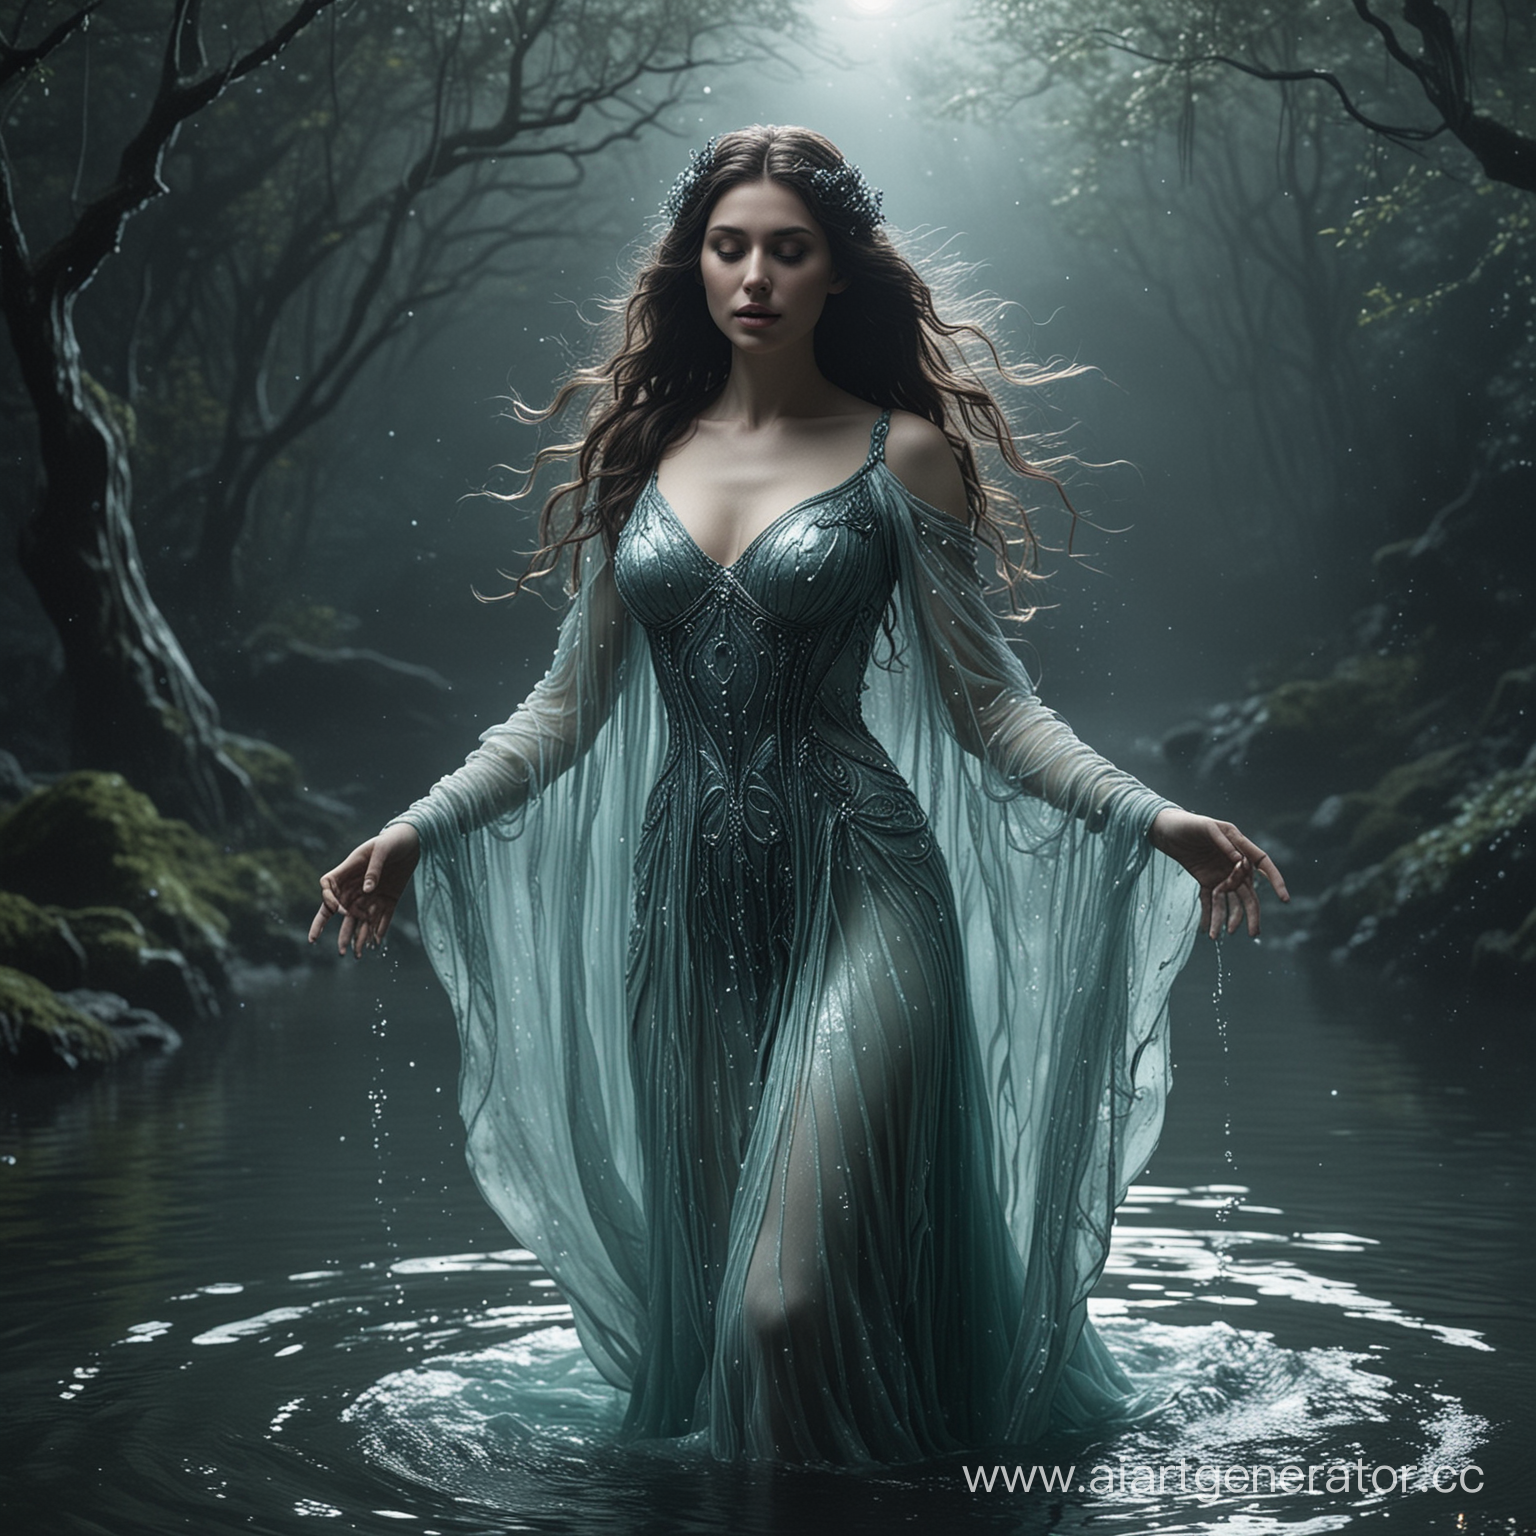 Spectral Siren: Haunting beauty, with a costume that shimmers like moonlit water, emitting a haunting melody that entrances all who hear it.make it cinematic 